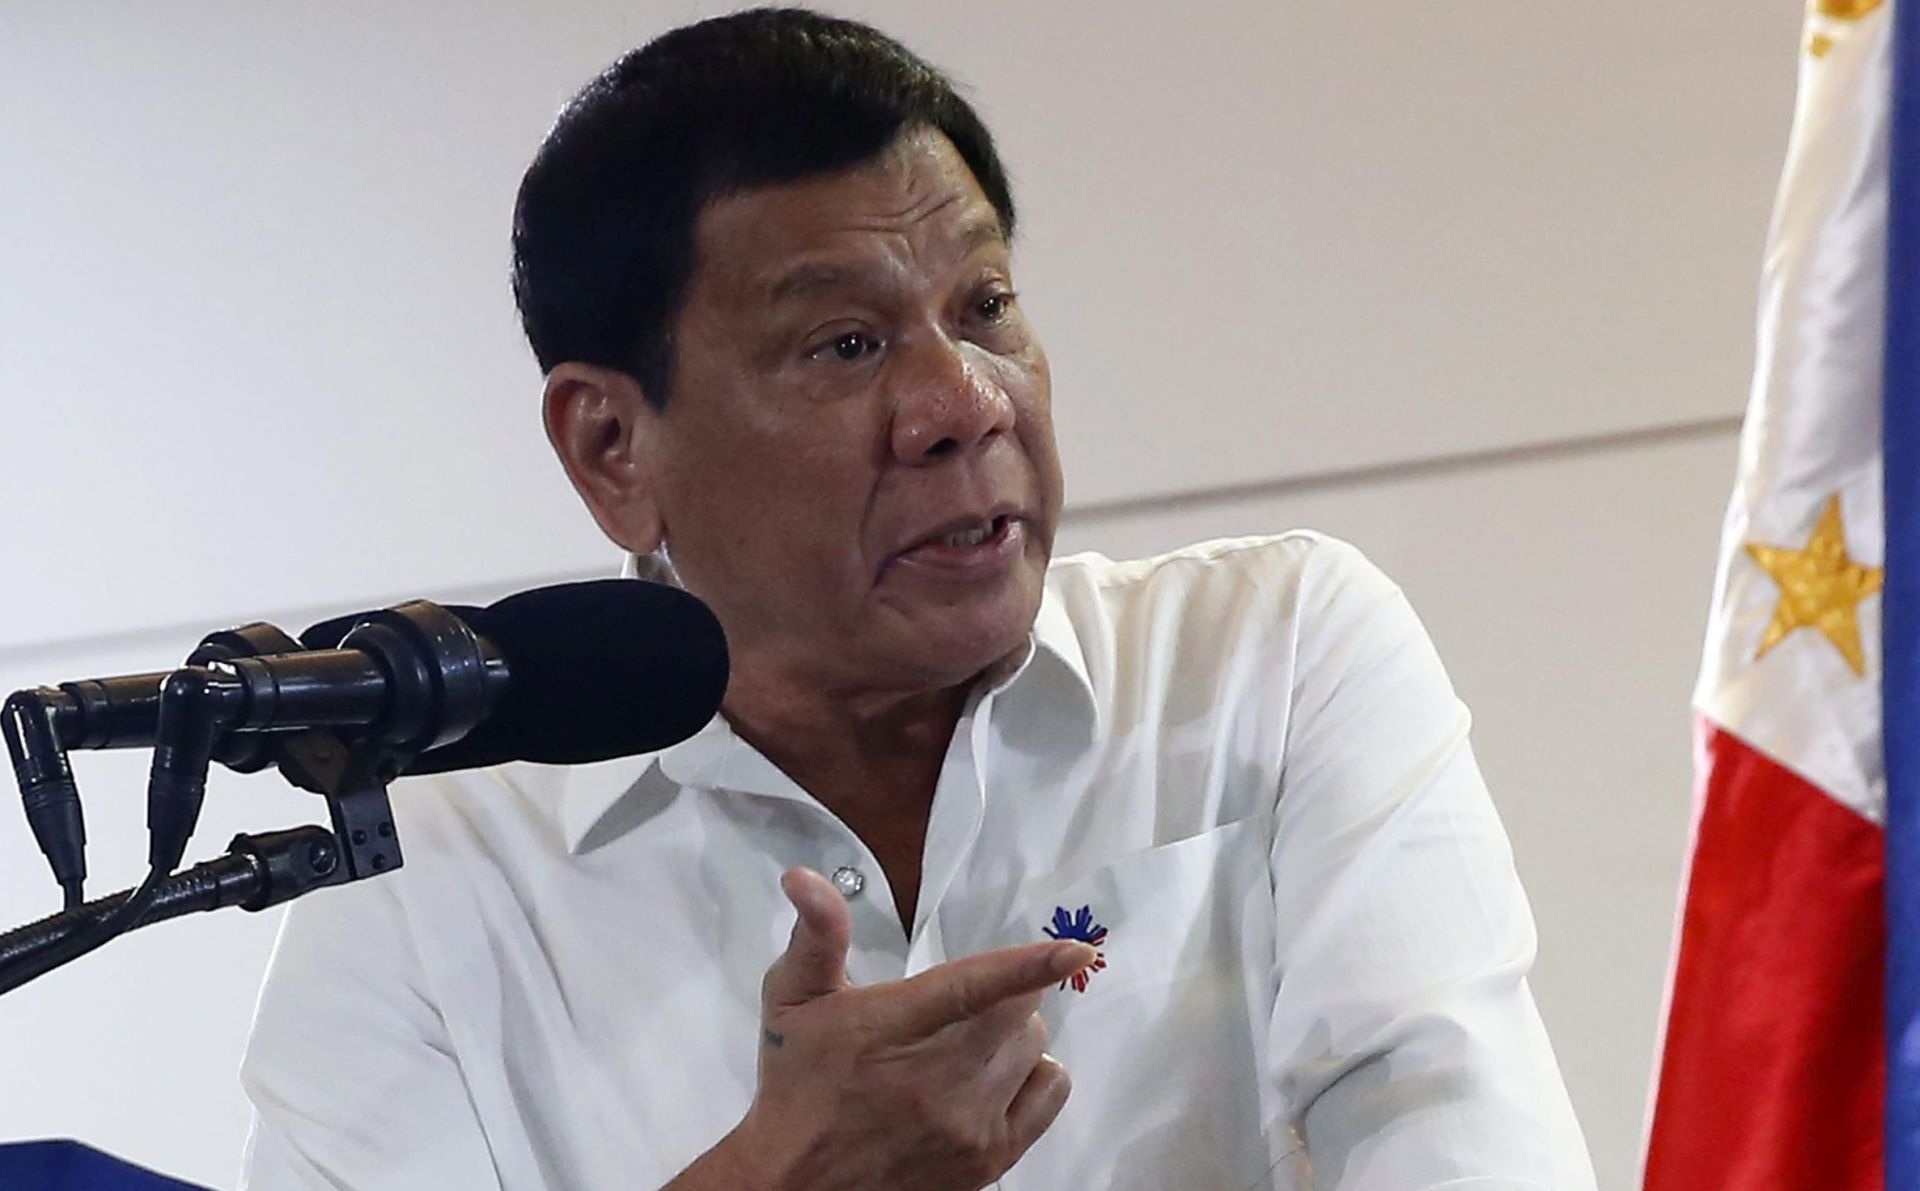 epa05645116 A handout picture dated and released on 24 November 2016 by the Presidential Photographers Division (PPD) shows Filipino President Rodrigo Duterte speaking following his arrival from his APEC trip, at Davao City international airport, Philippines. The Filipino president has announced his intention to open up several economic sectors of the country to new investors to achieve faster development and greater social equality, according to a statement released by the Filipino presidency. The president added the government is finalizing the details to allow the entry of new firms in the field of information and communications to promote competitiveness and improve quality of services. Duterte's announcement comes at a time of a major foreign policy shift in the Philippines, which has been distancing itself from traditional ally the United States and moving closer to China and Russia.  EPA/RICHARD MADELO/ PPD / HANDOUT  HANDOUT EDITORIAL USE ONLY/NO SALES